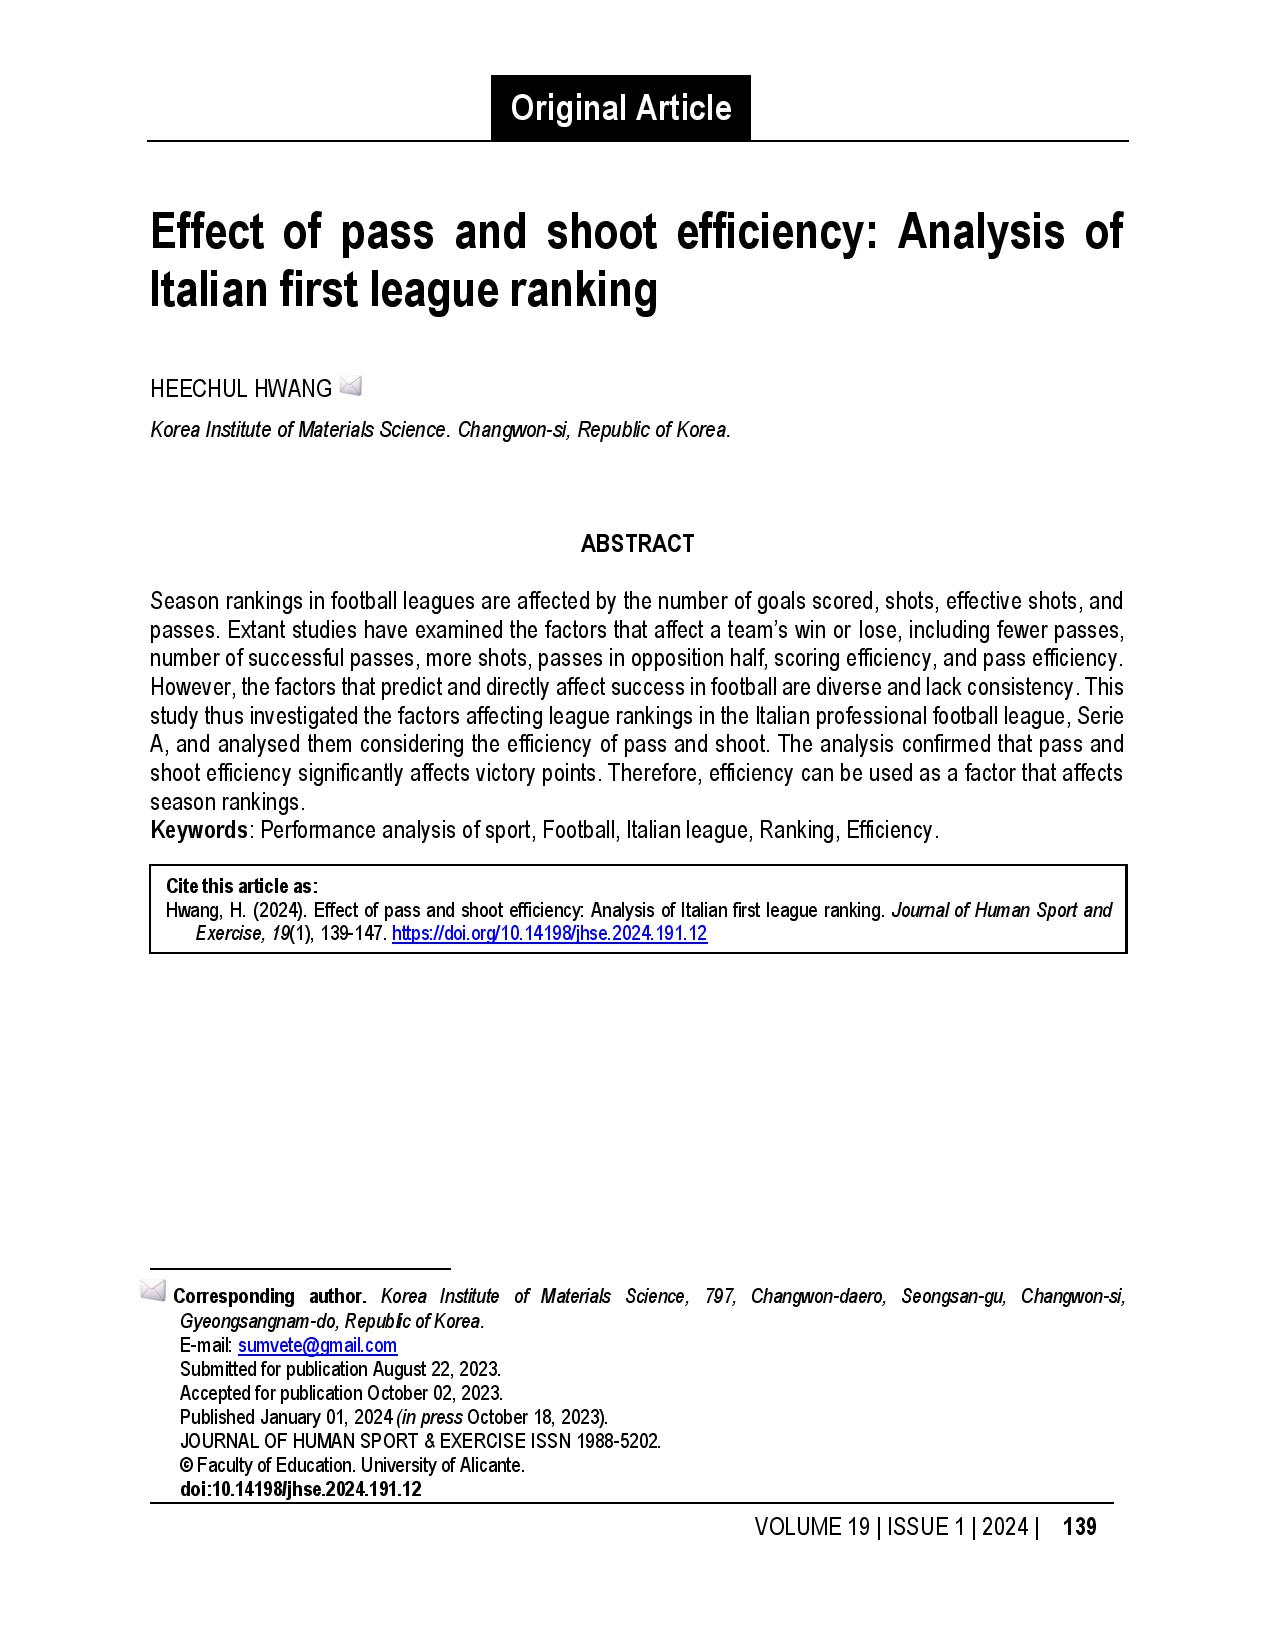 Effect of pass and shoot efficiency: Analysis of Italian first league ranking